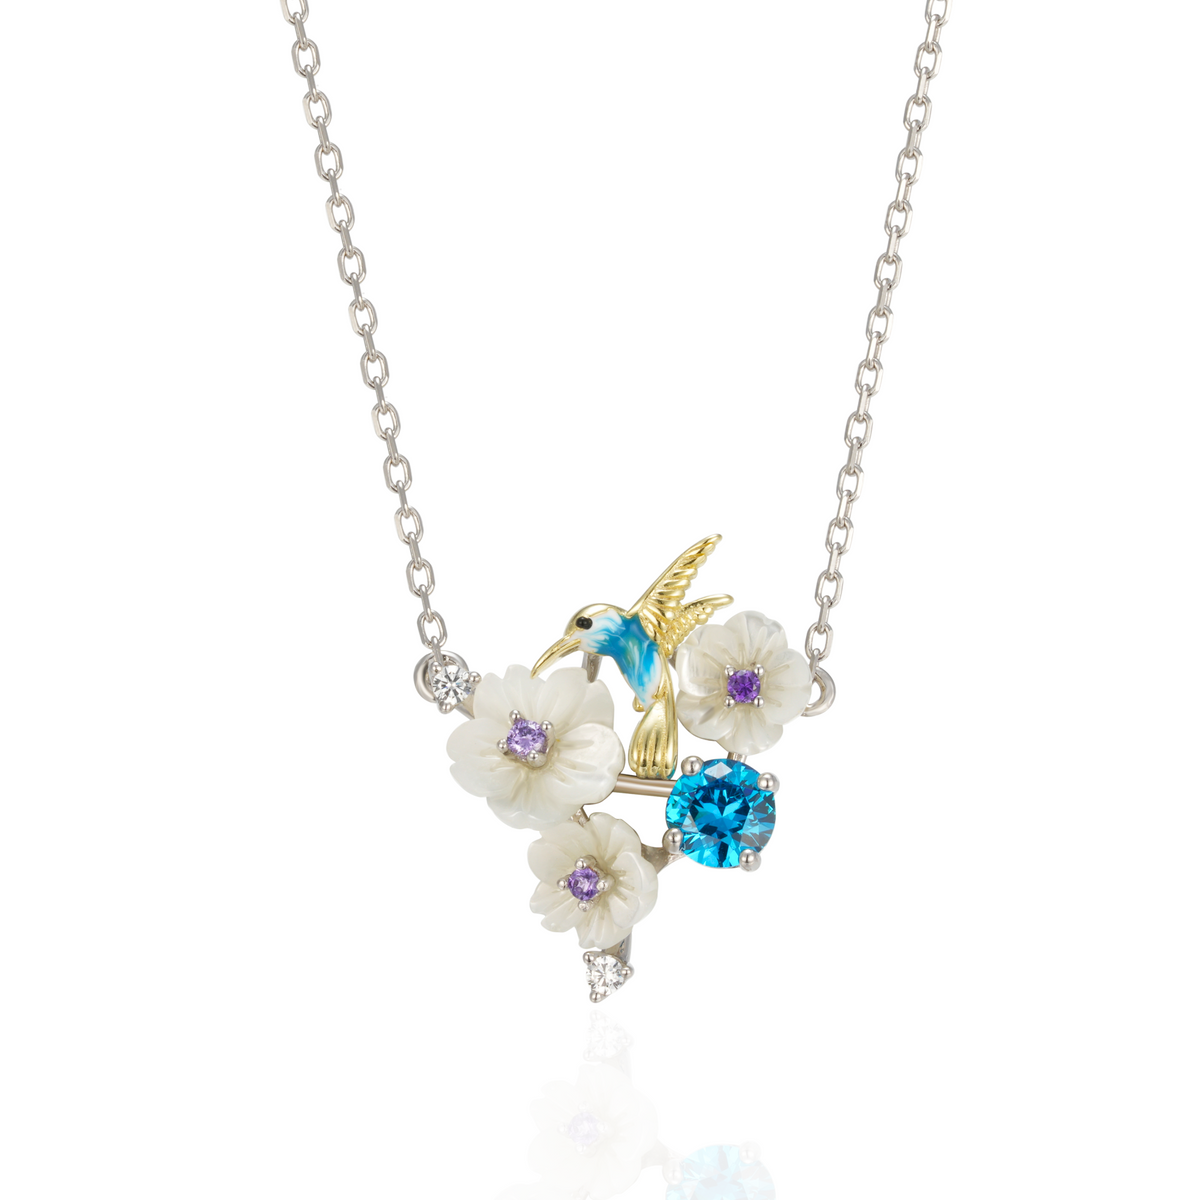 A silver gold plated necklace with a blue stone, enamel, shell flowers and a bird charm.